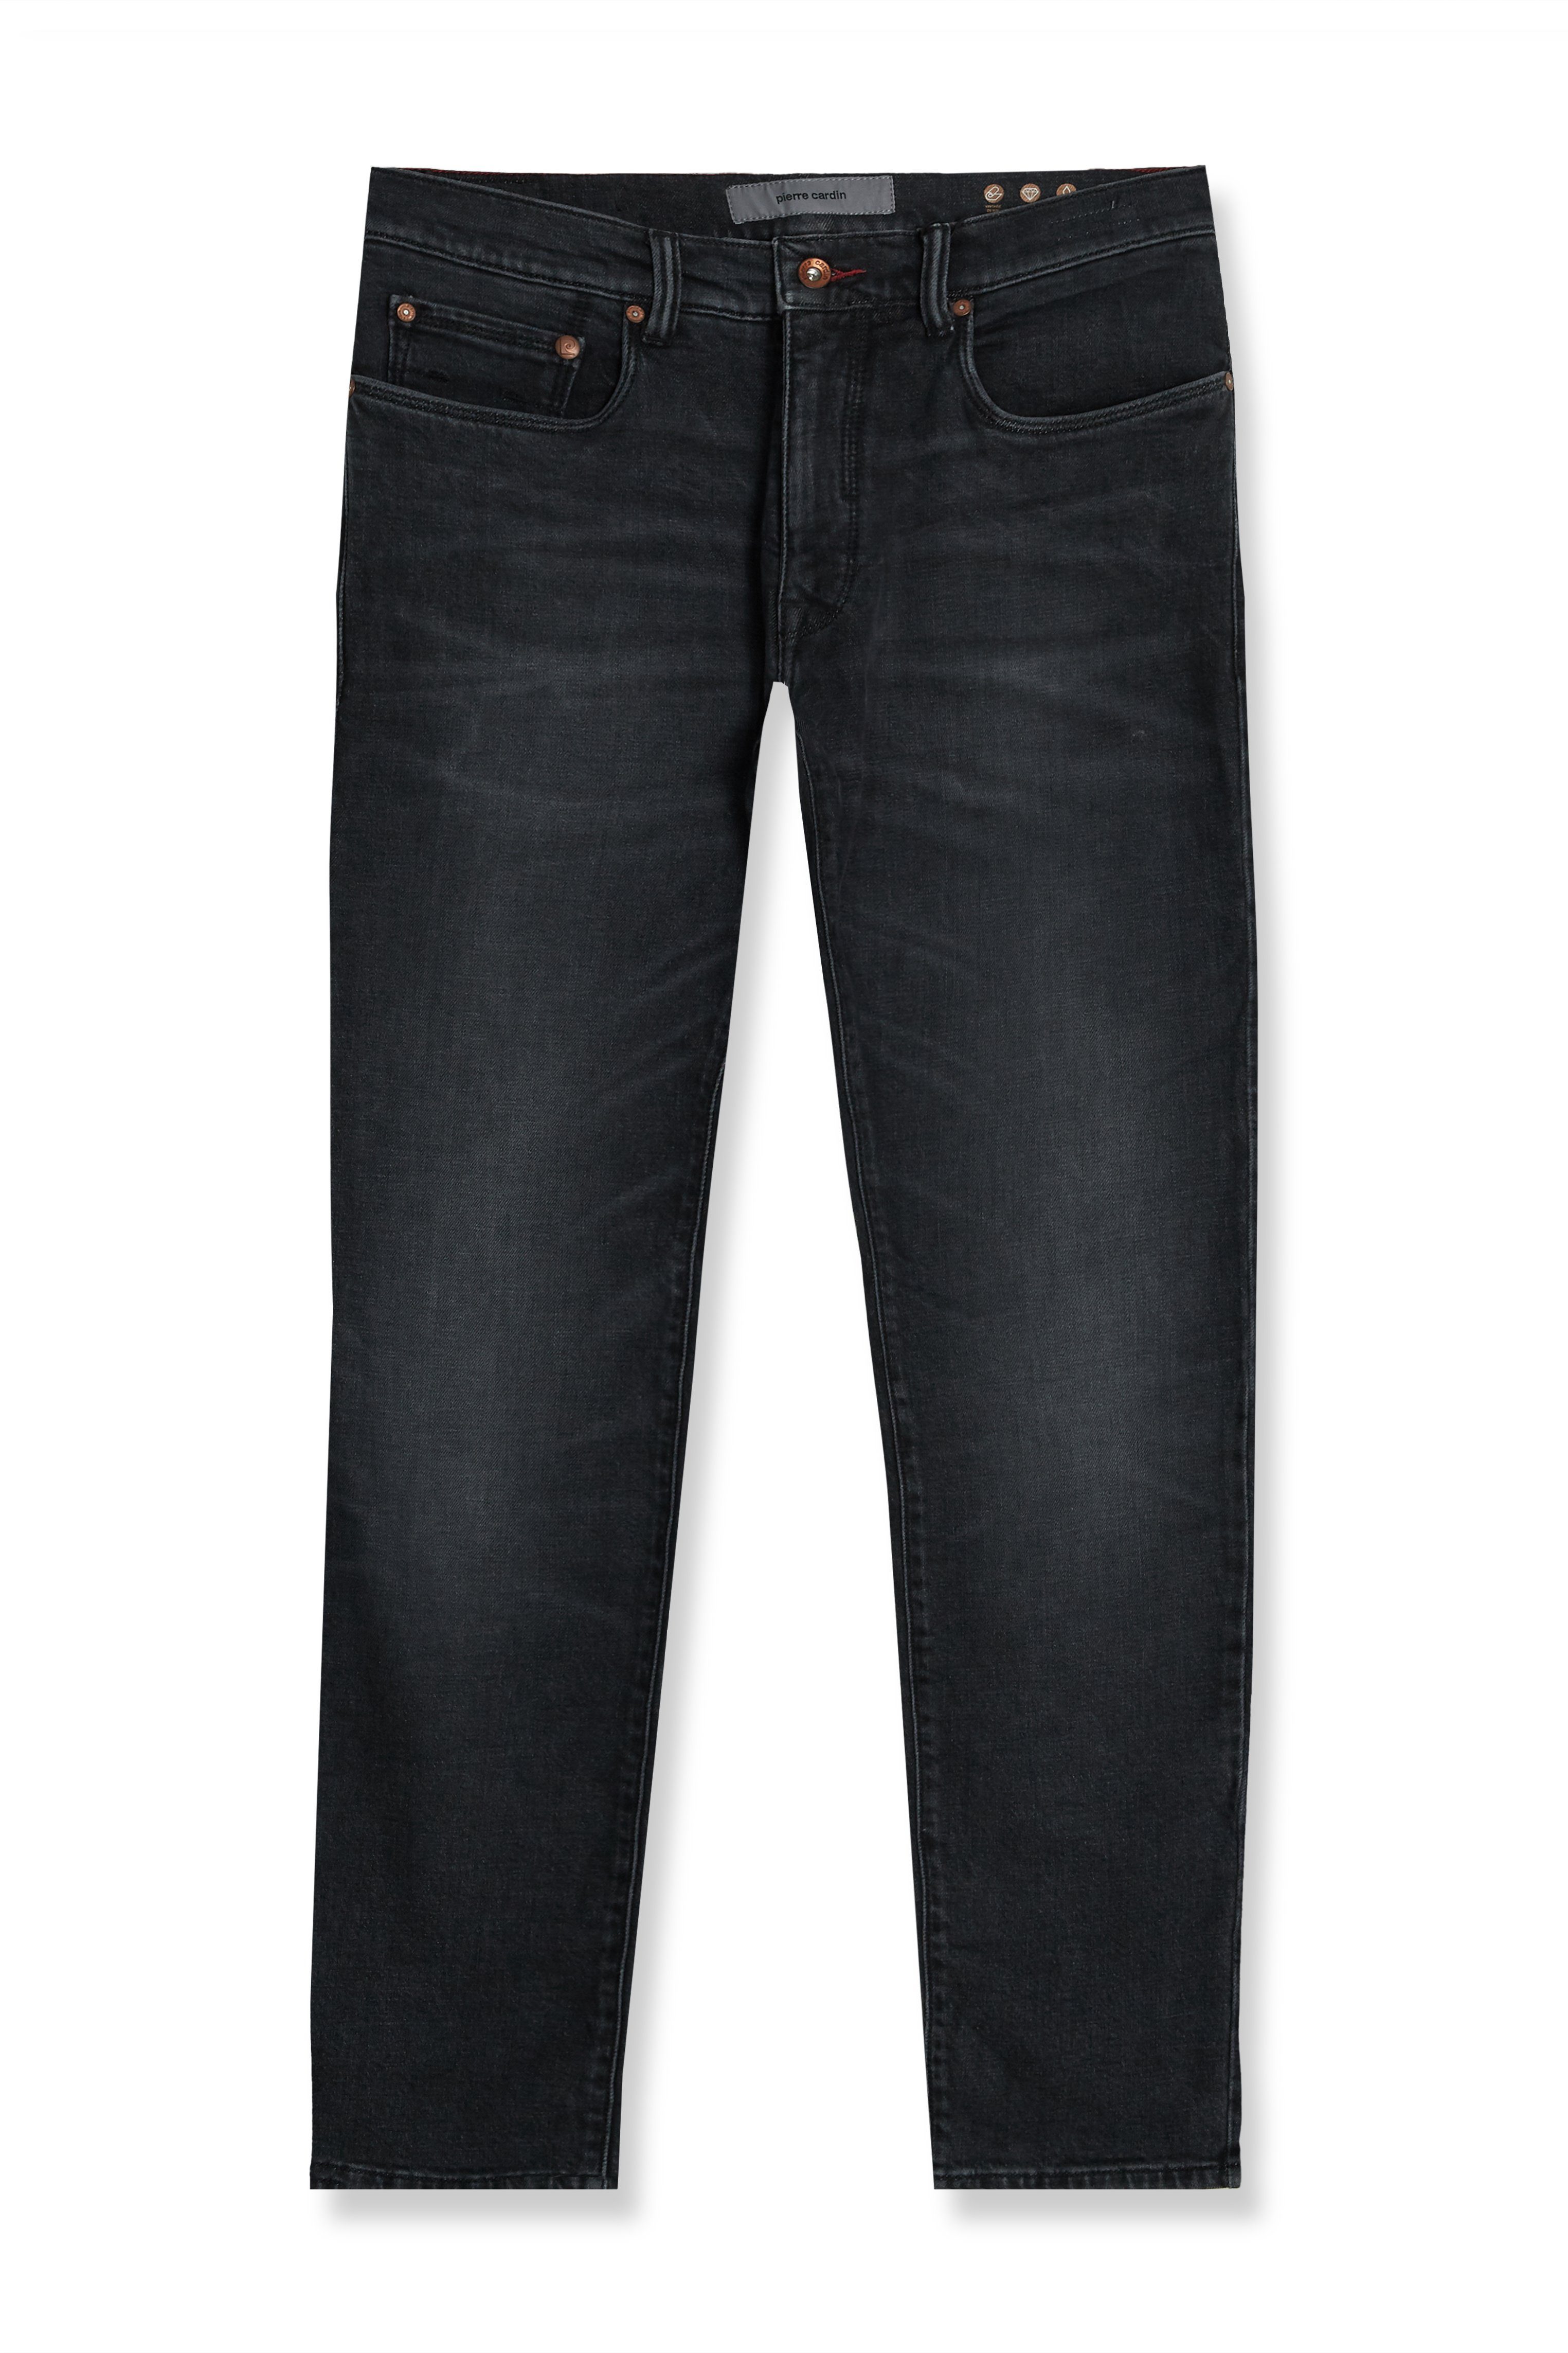 Pierre Cardin Tapered-fit-Jeans Lyon Tapered Less Chemicals, Less Energy, Less Water